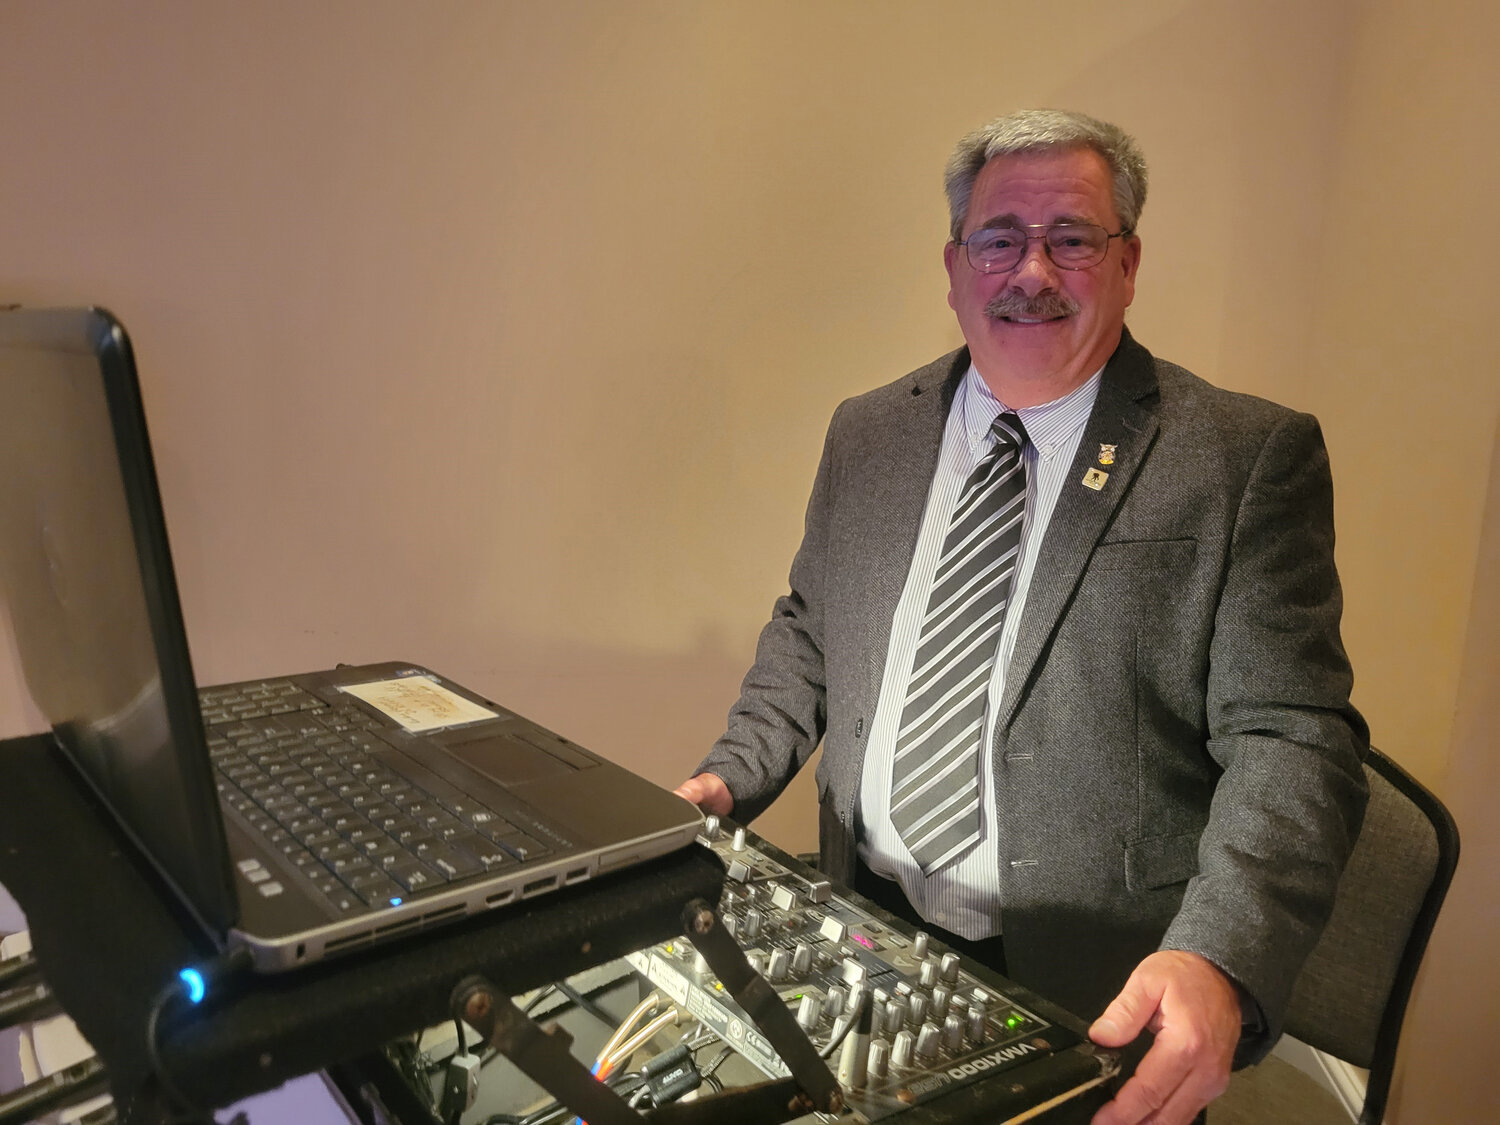 DJ Paul Freebery provides music at the Middletown Area Chamber of Commerce Gala on Friday.